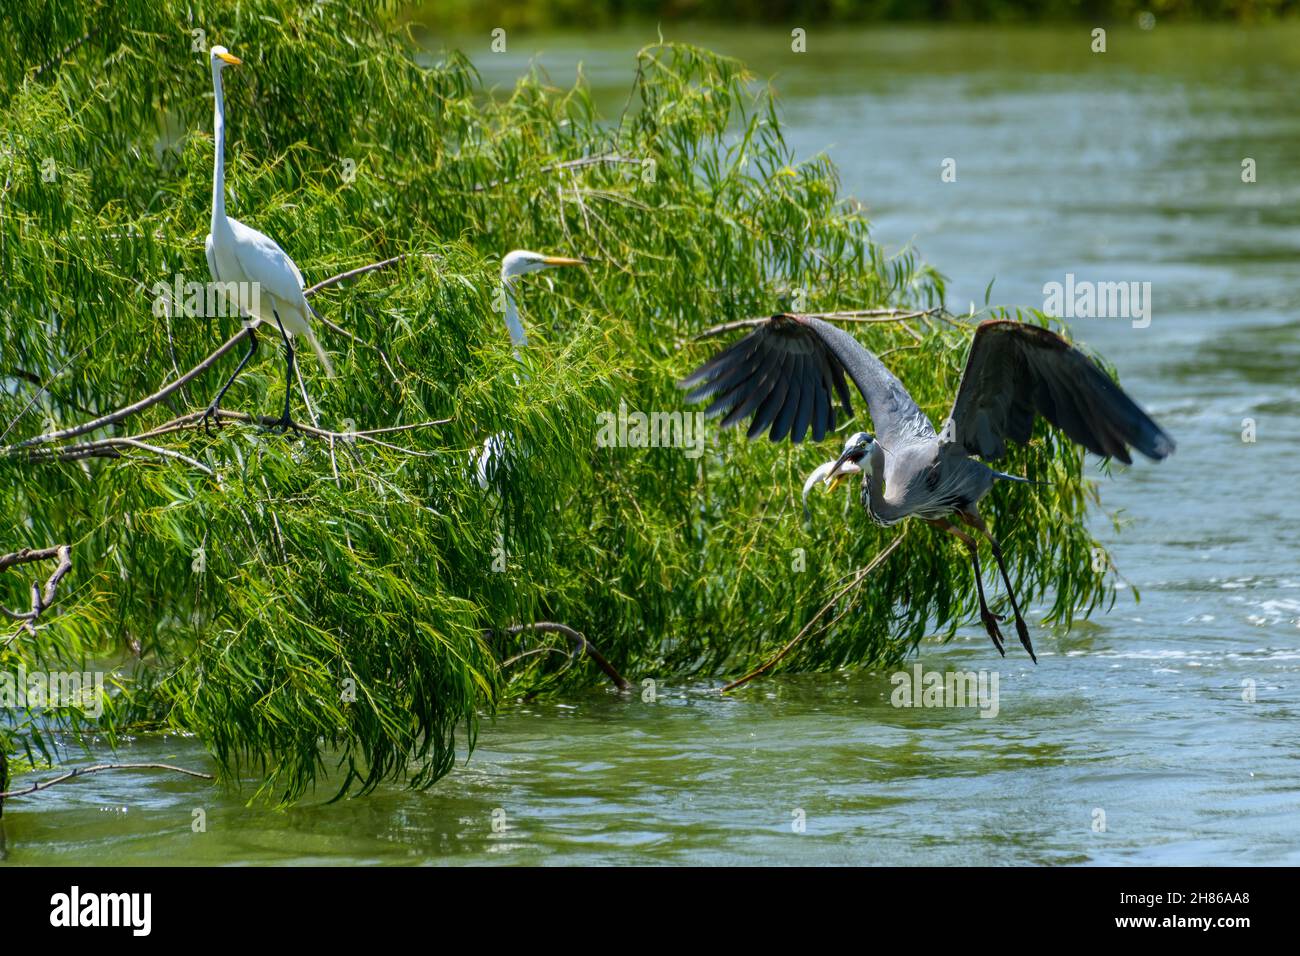 great Blue Heron (Ardea herodias) flying above water with fish in its mouth. Snowy egrets in the background Stock Photo